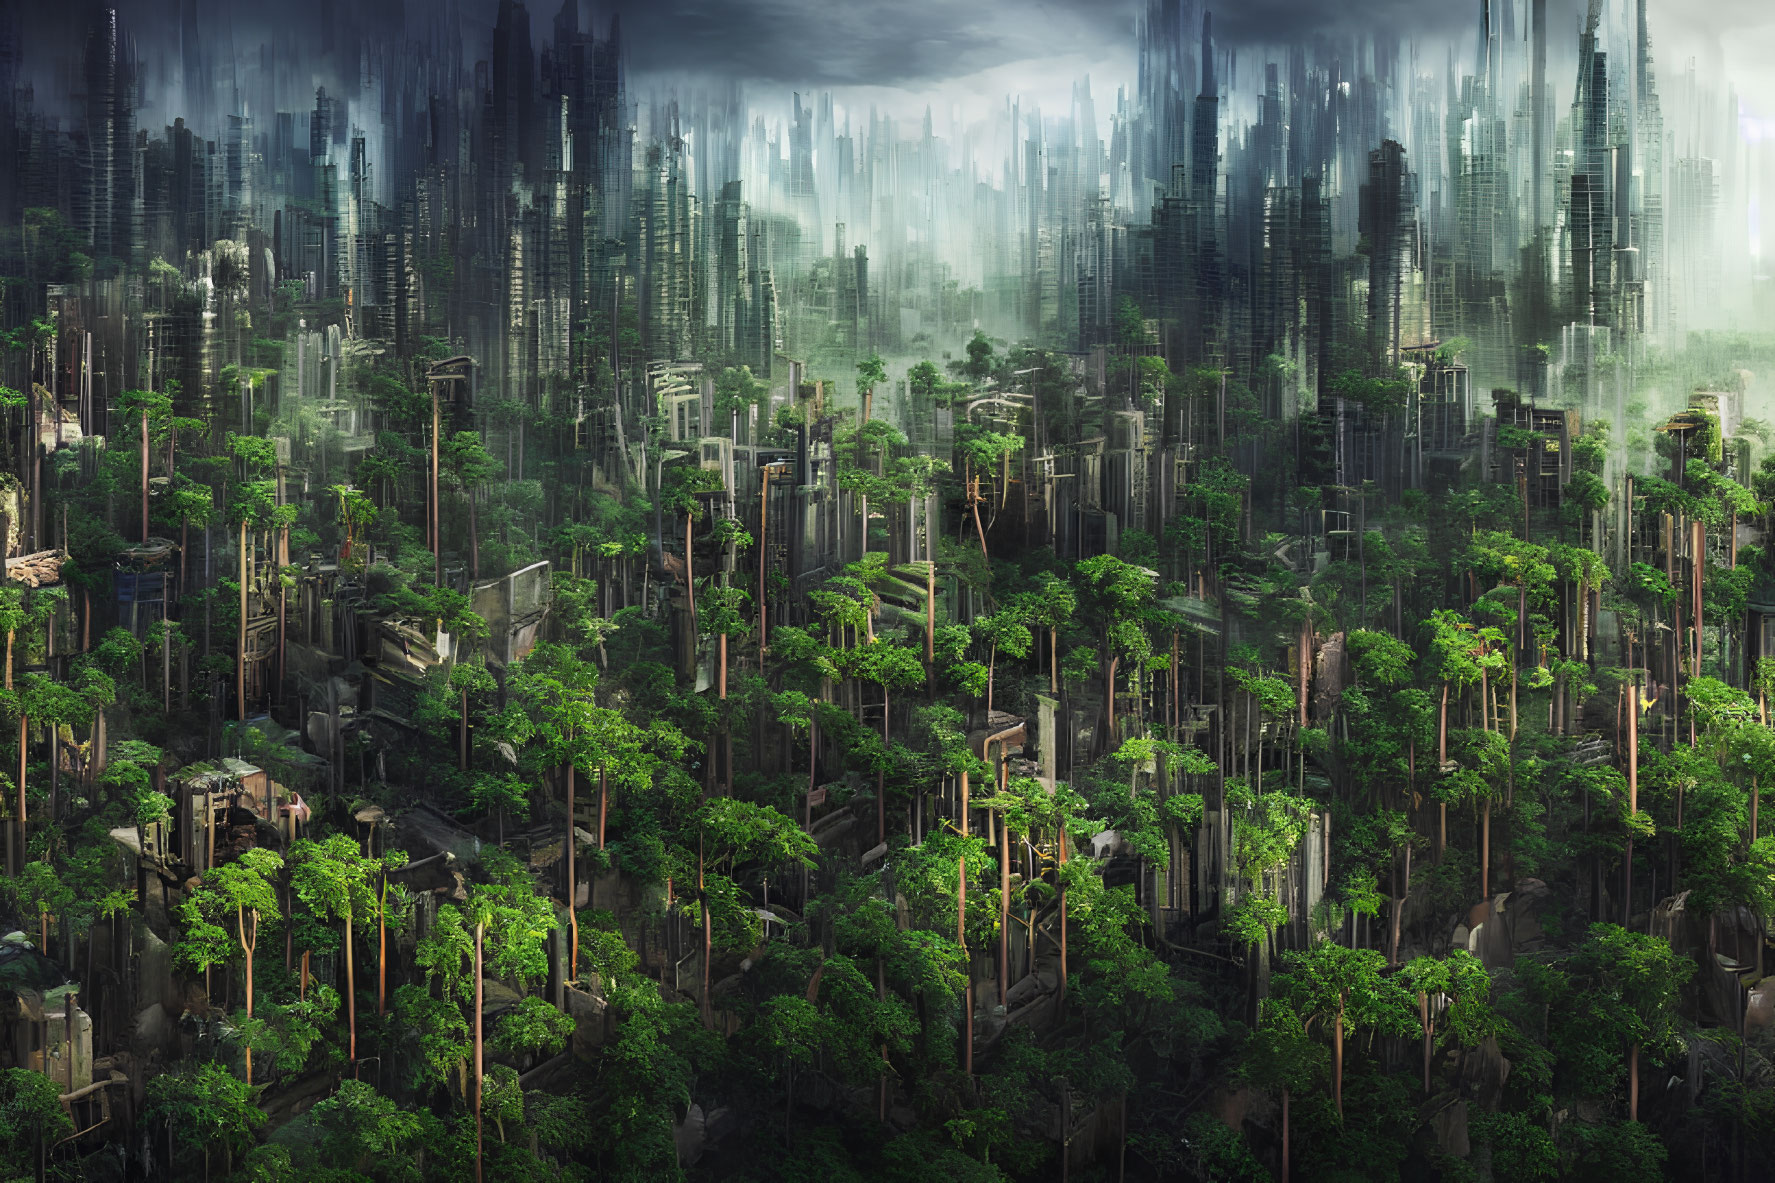 Green forest merges with futuristic skyscrapers in misty scene